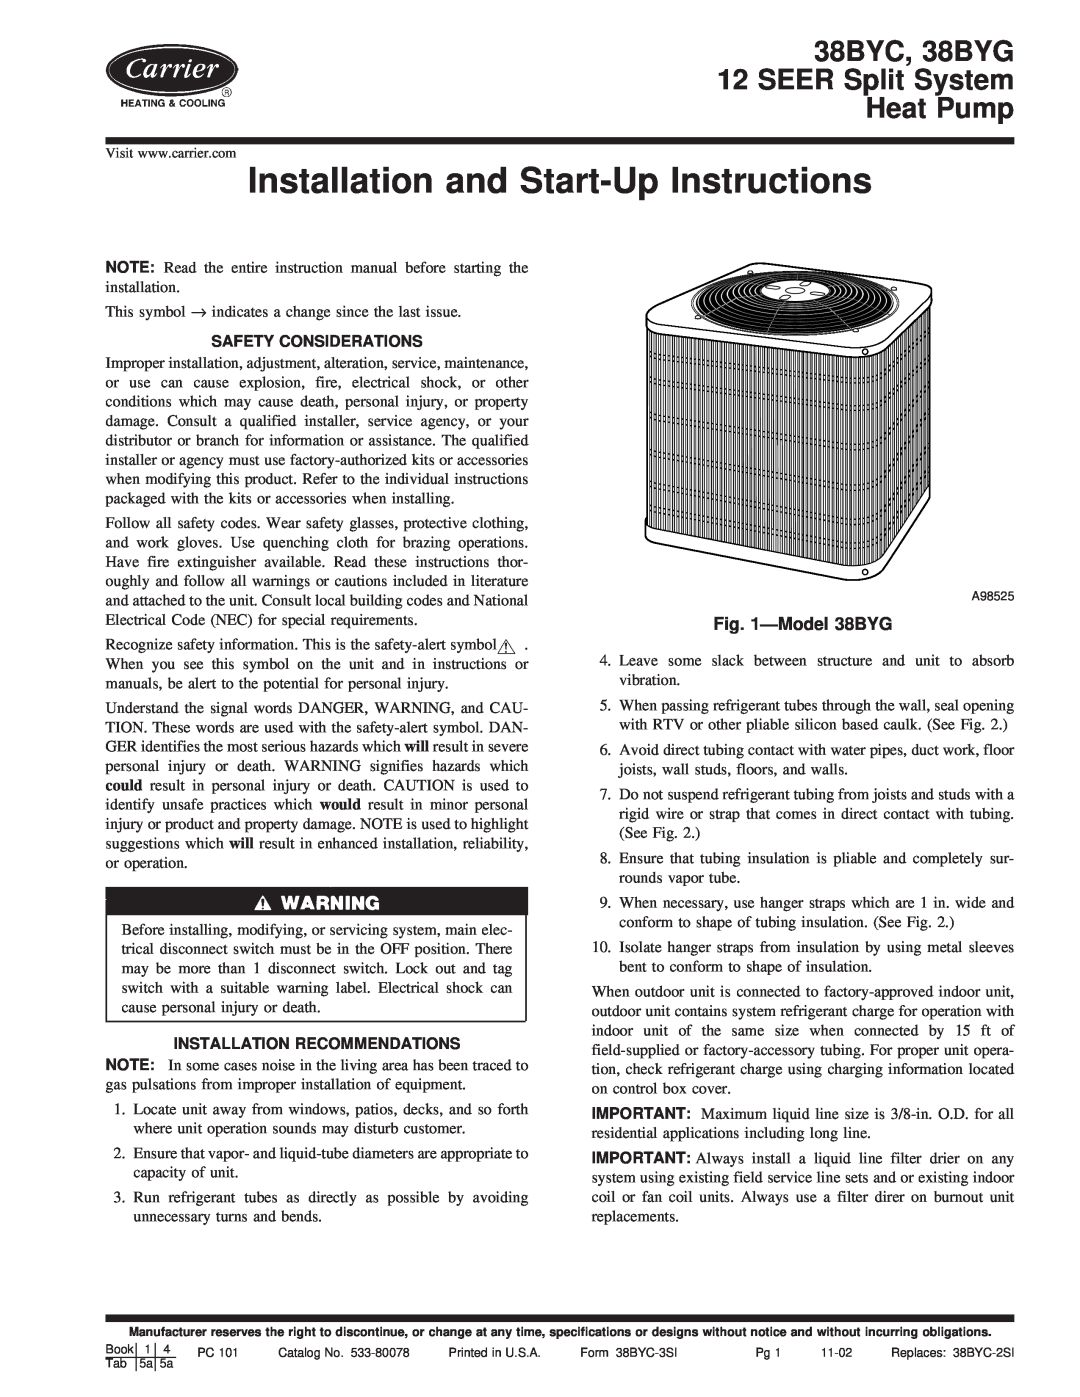 Carrier 38BYC instruction manual Model38BYG, Safety Considerations, Installation Recommendations 